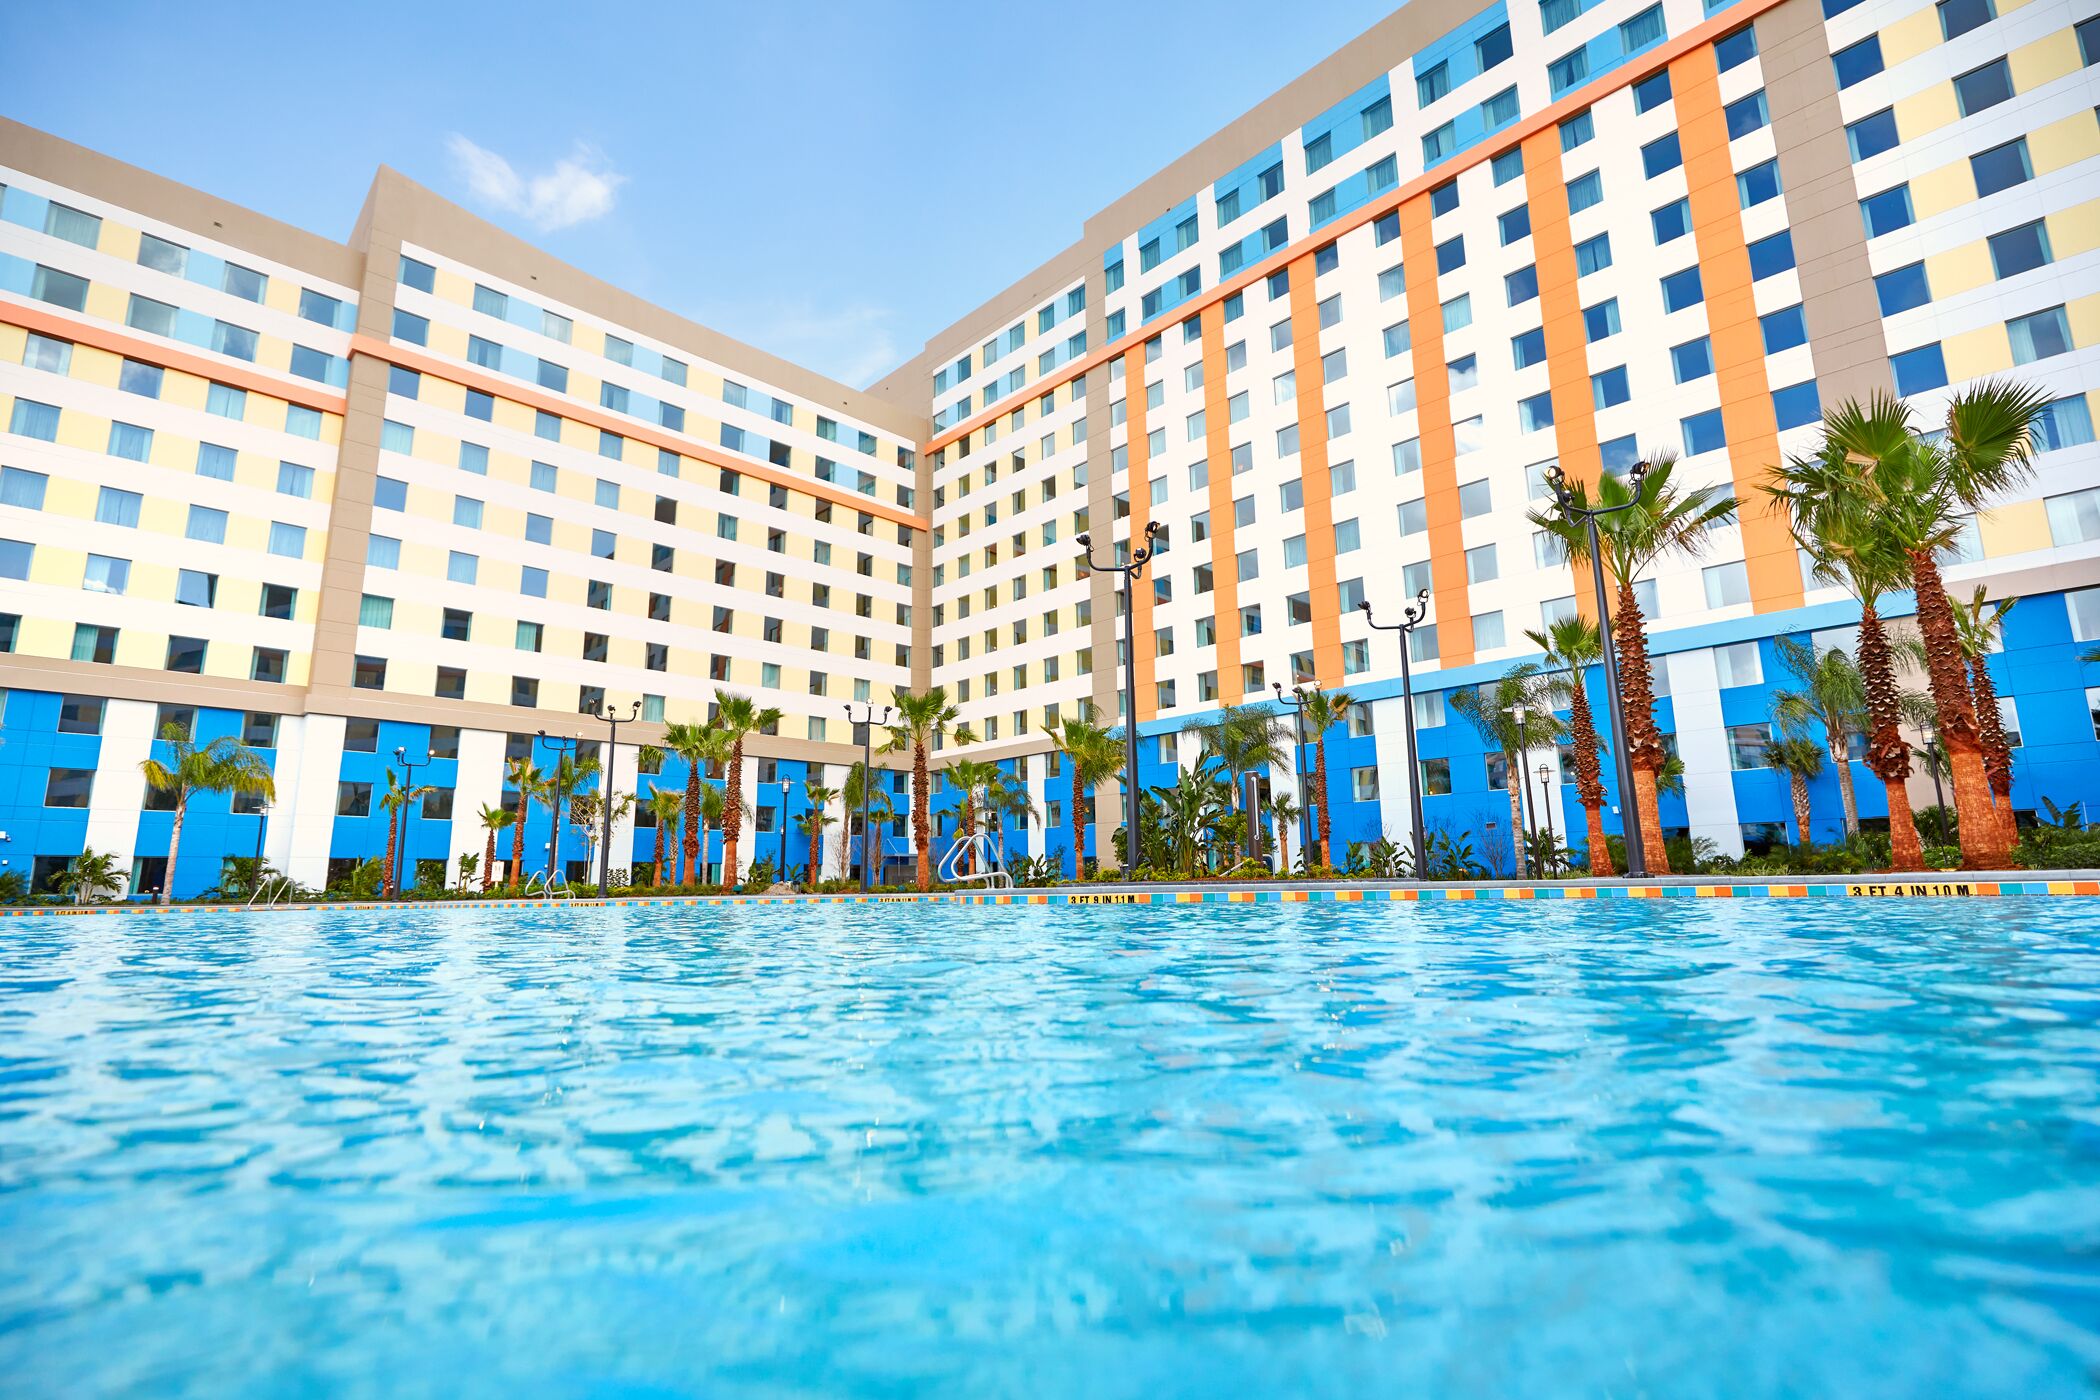 FIRST LOOK: Universal Orlando’s Endless Summer Resort – Dockside Inn and Suites